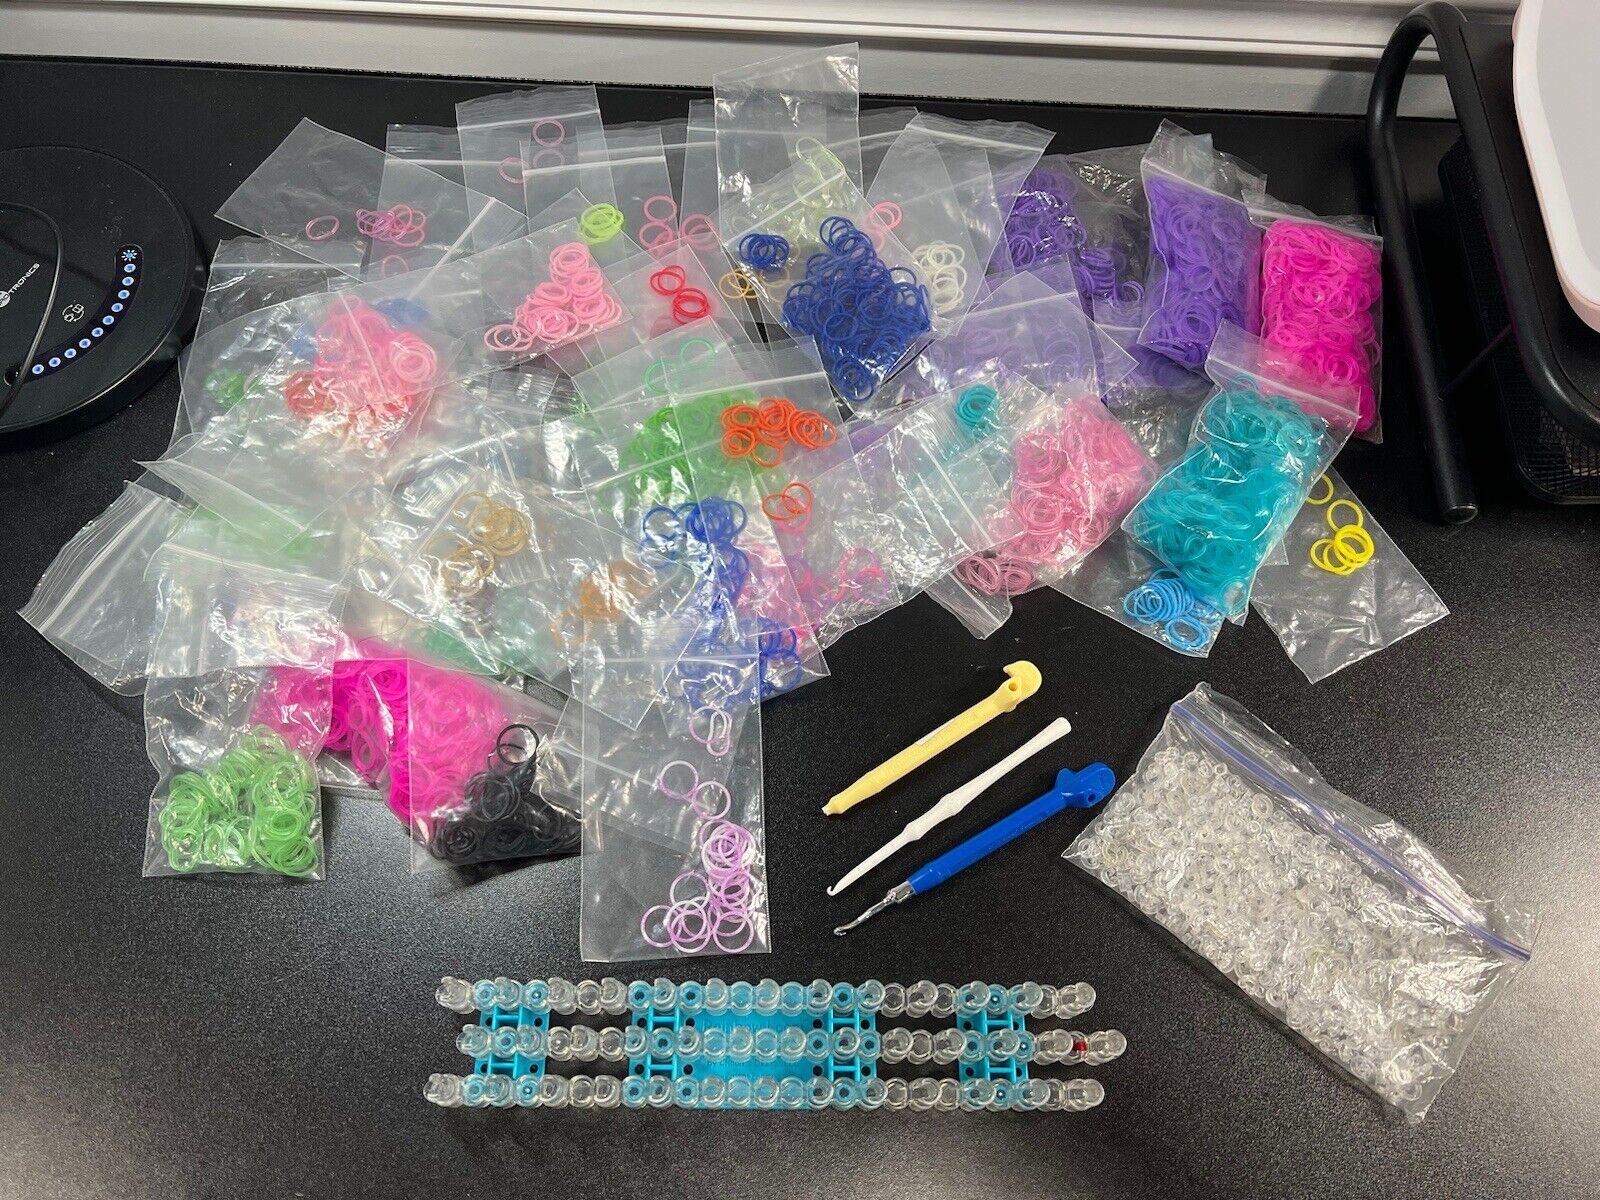 Rainbow Loom LOT Lots of Rubber Bands, loom, tools, Clear Clips View Photos